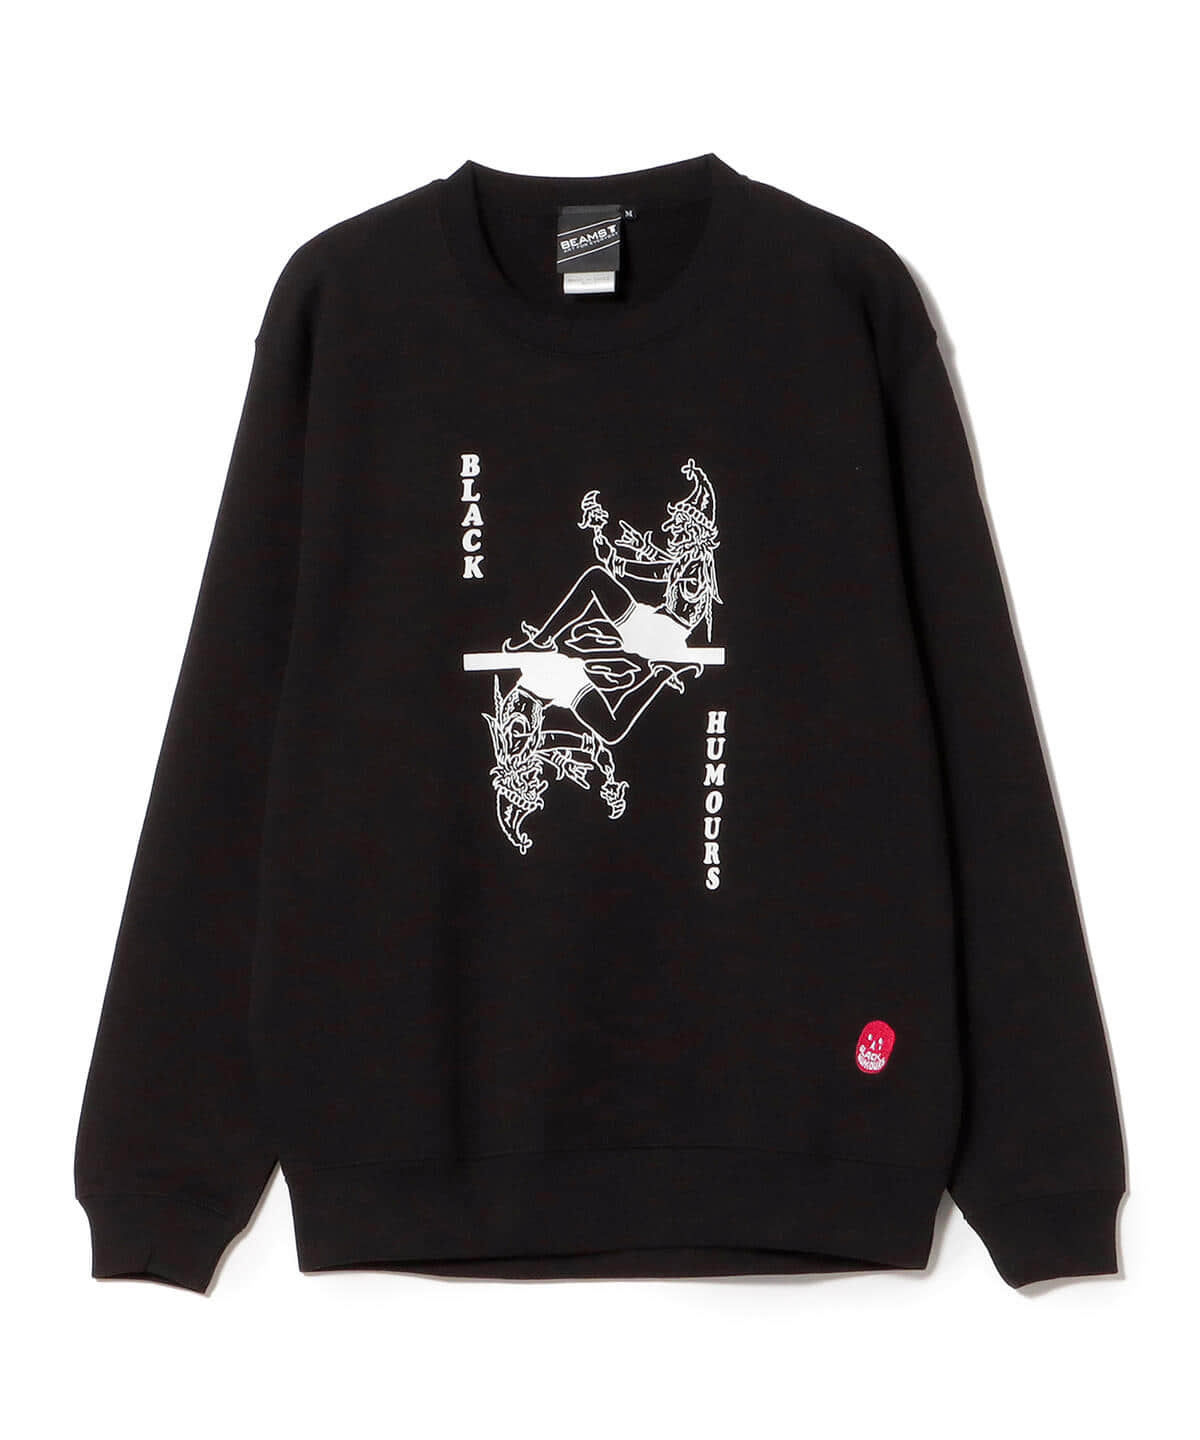 BEAMS T（ビームスT）【アウトレット】【SPECIAL PRICE】BEAMS T